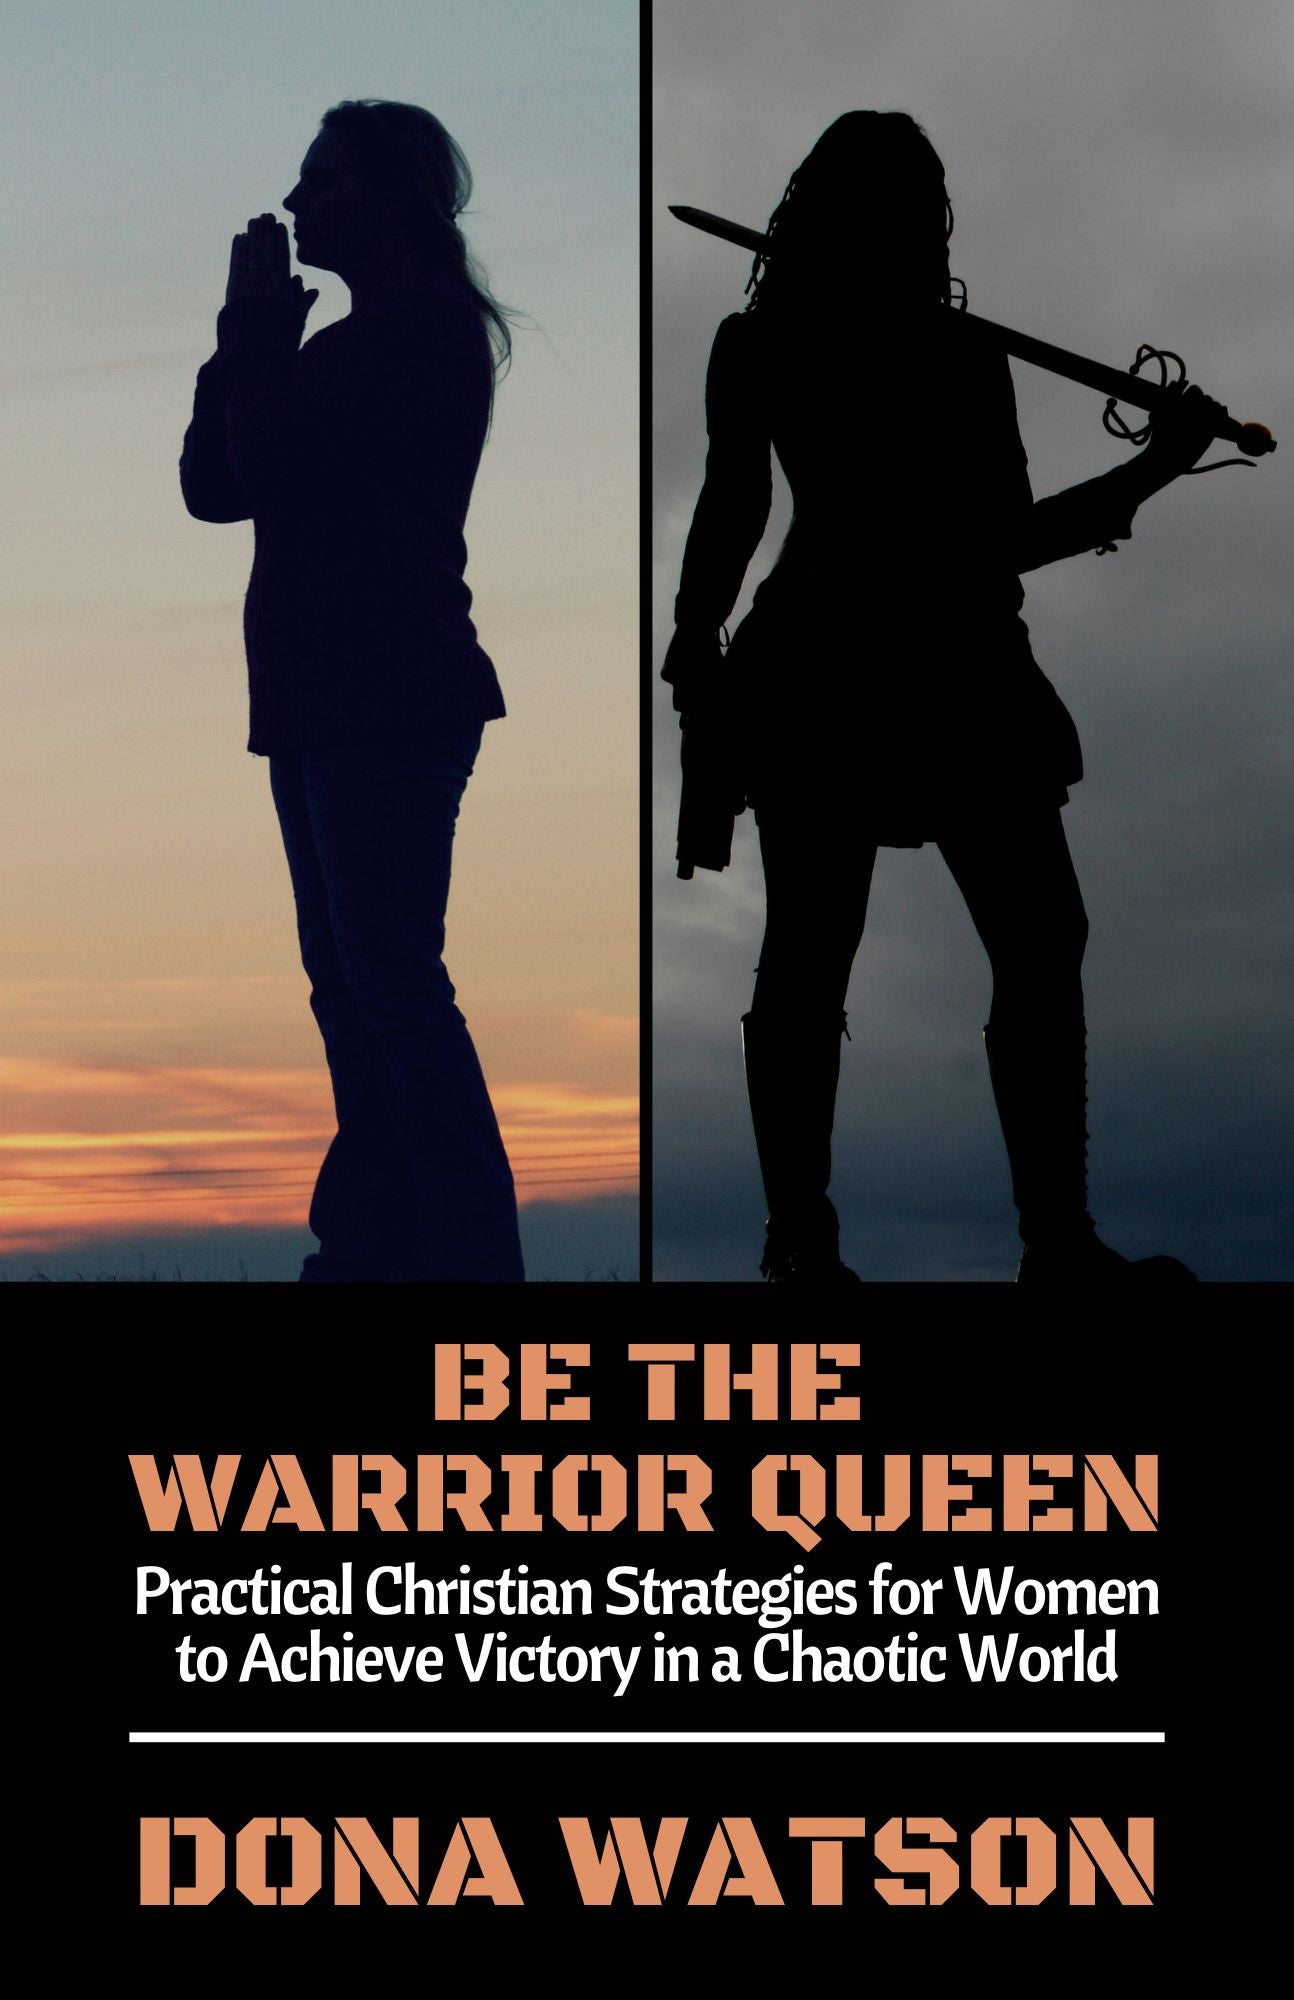 Be the Warrior Queen: Practical Christian Strategies for Women to Achieve Victory in a Chaotic World (Kindle, ePUB)